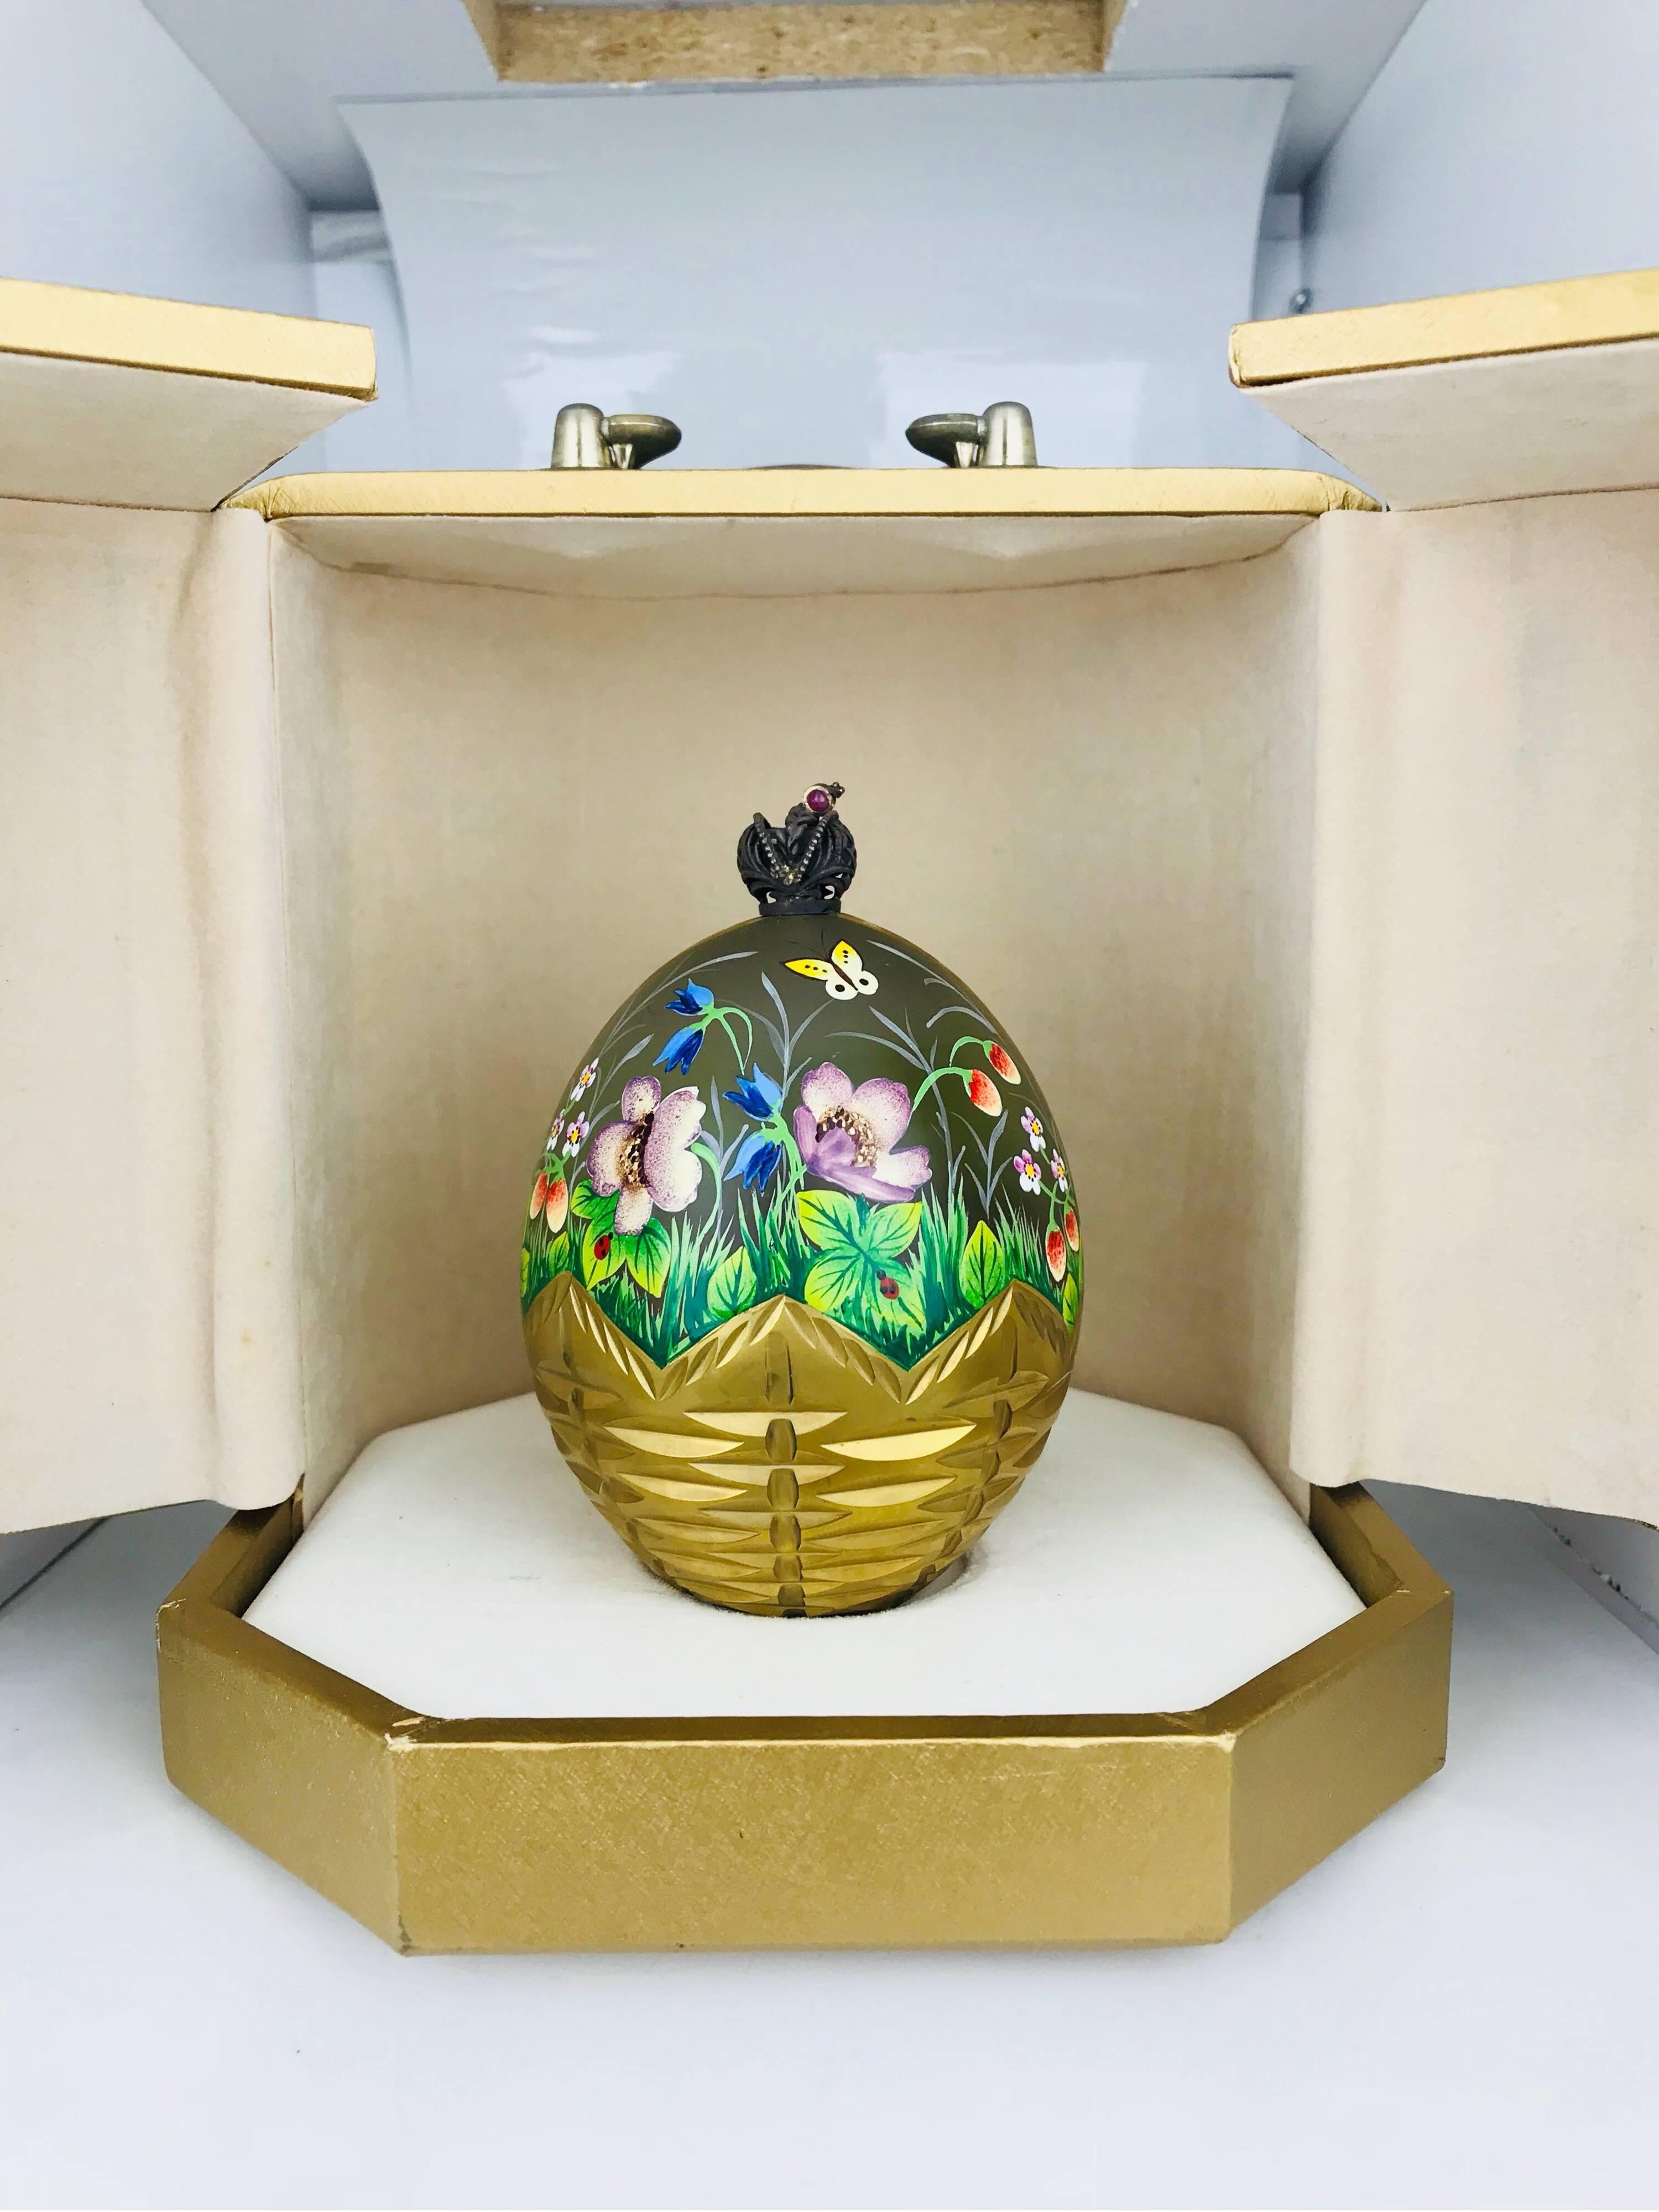 Faberge Limited Edition, Summer Egg.  Hand painted and gilded in 23 carat gold  with pictures of flowers and butterfly's in a meadow.  This famous limited edition is number 220 out of 750 and comes with original Box and Papers.  
The scene is set in